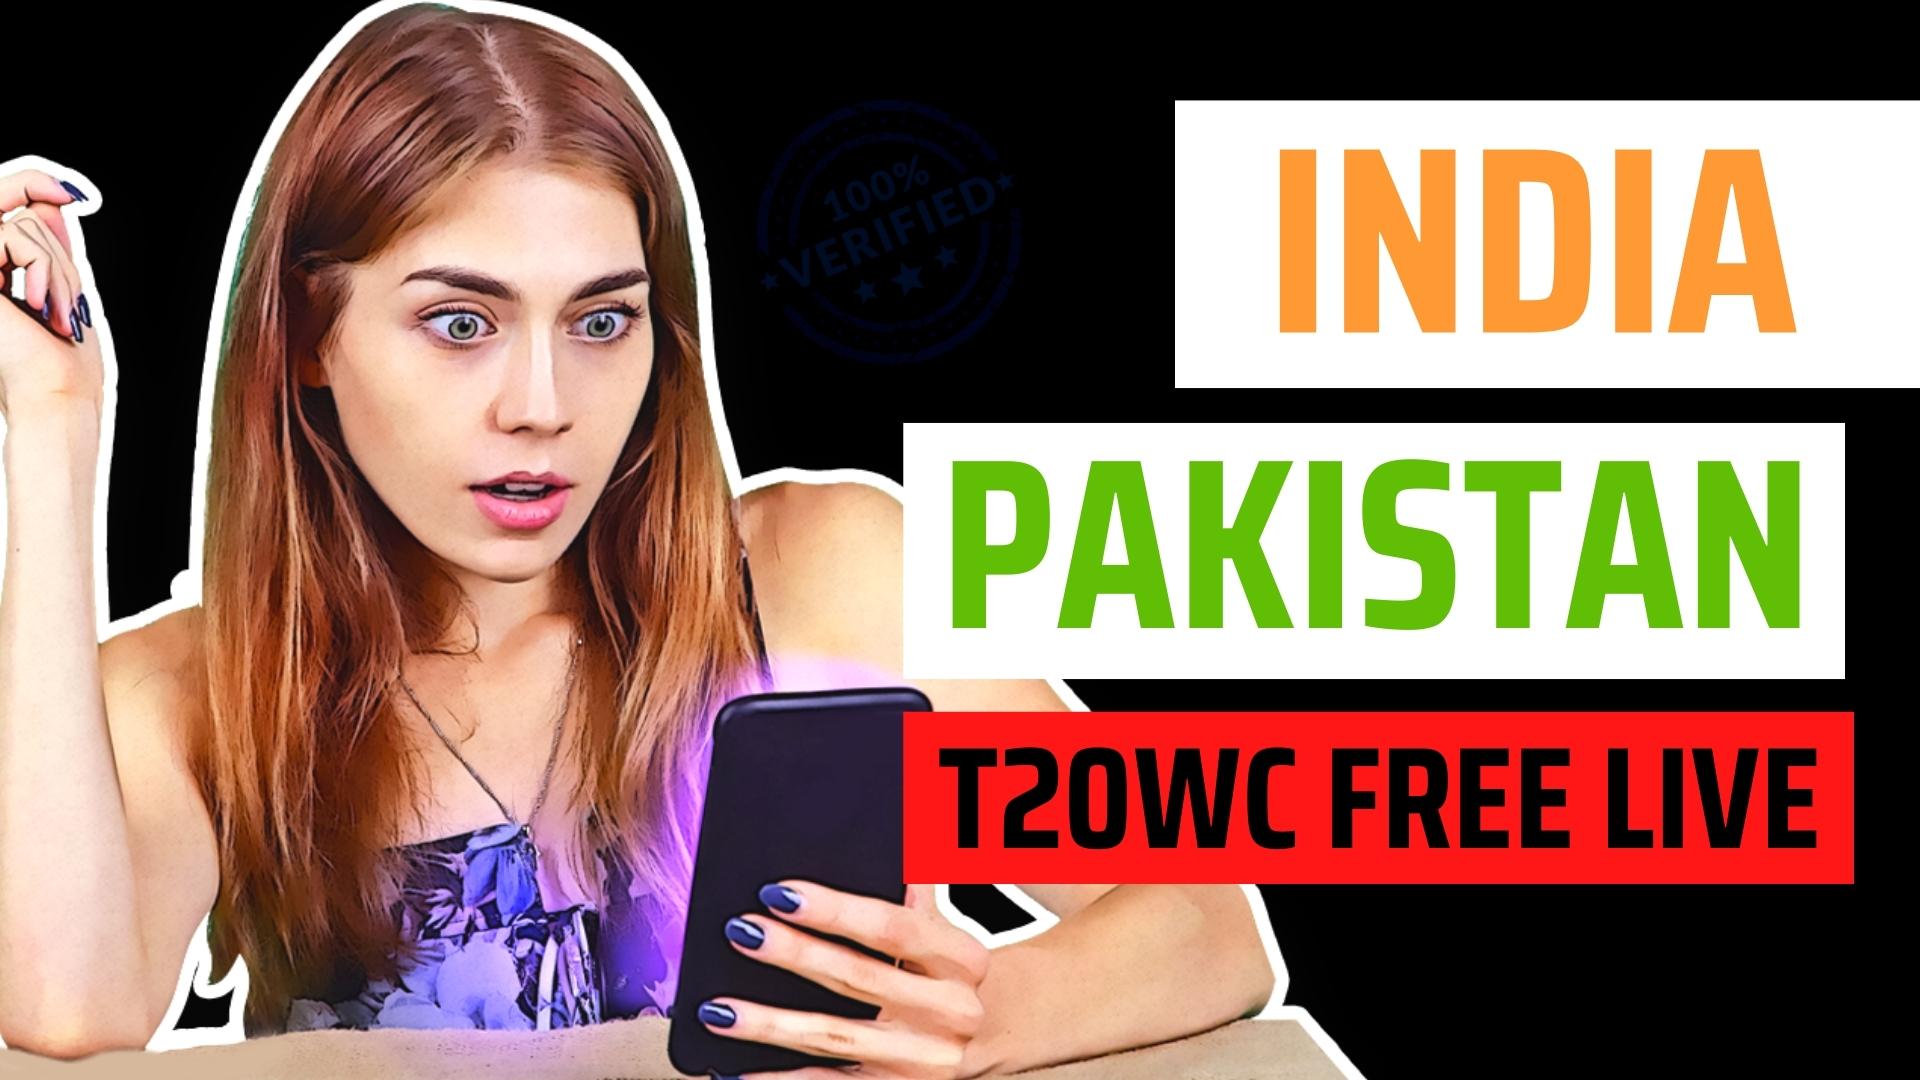 IND vs PAK T20 World Cup FREE Live Streaming in India, USA, UK, and Other Countries - Watch IND vs PAK T20WC on Android Mobile, Laptop, TV